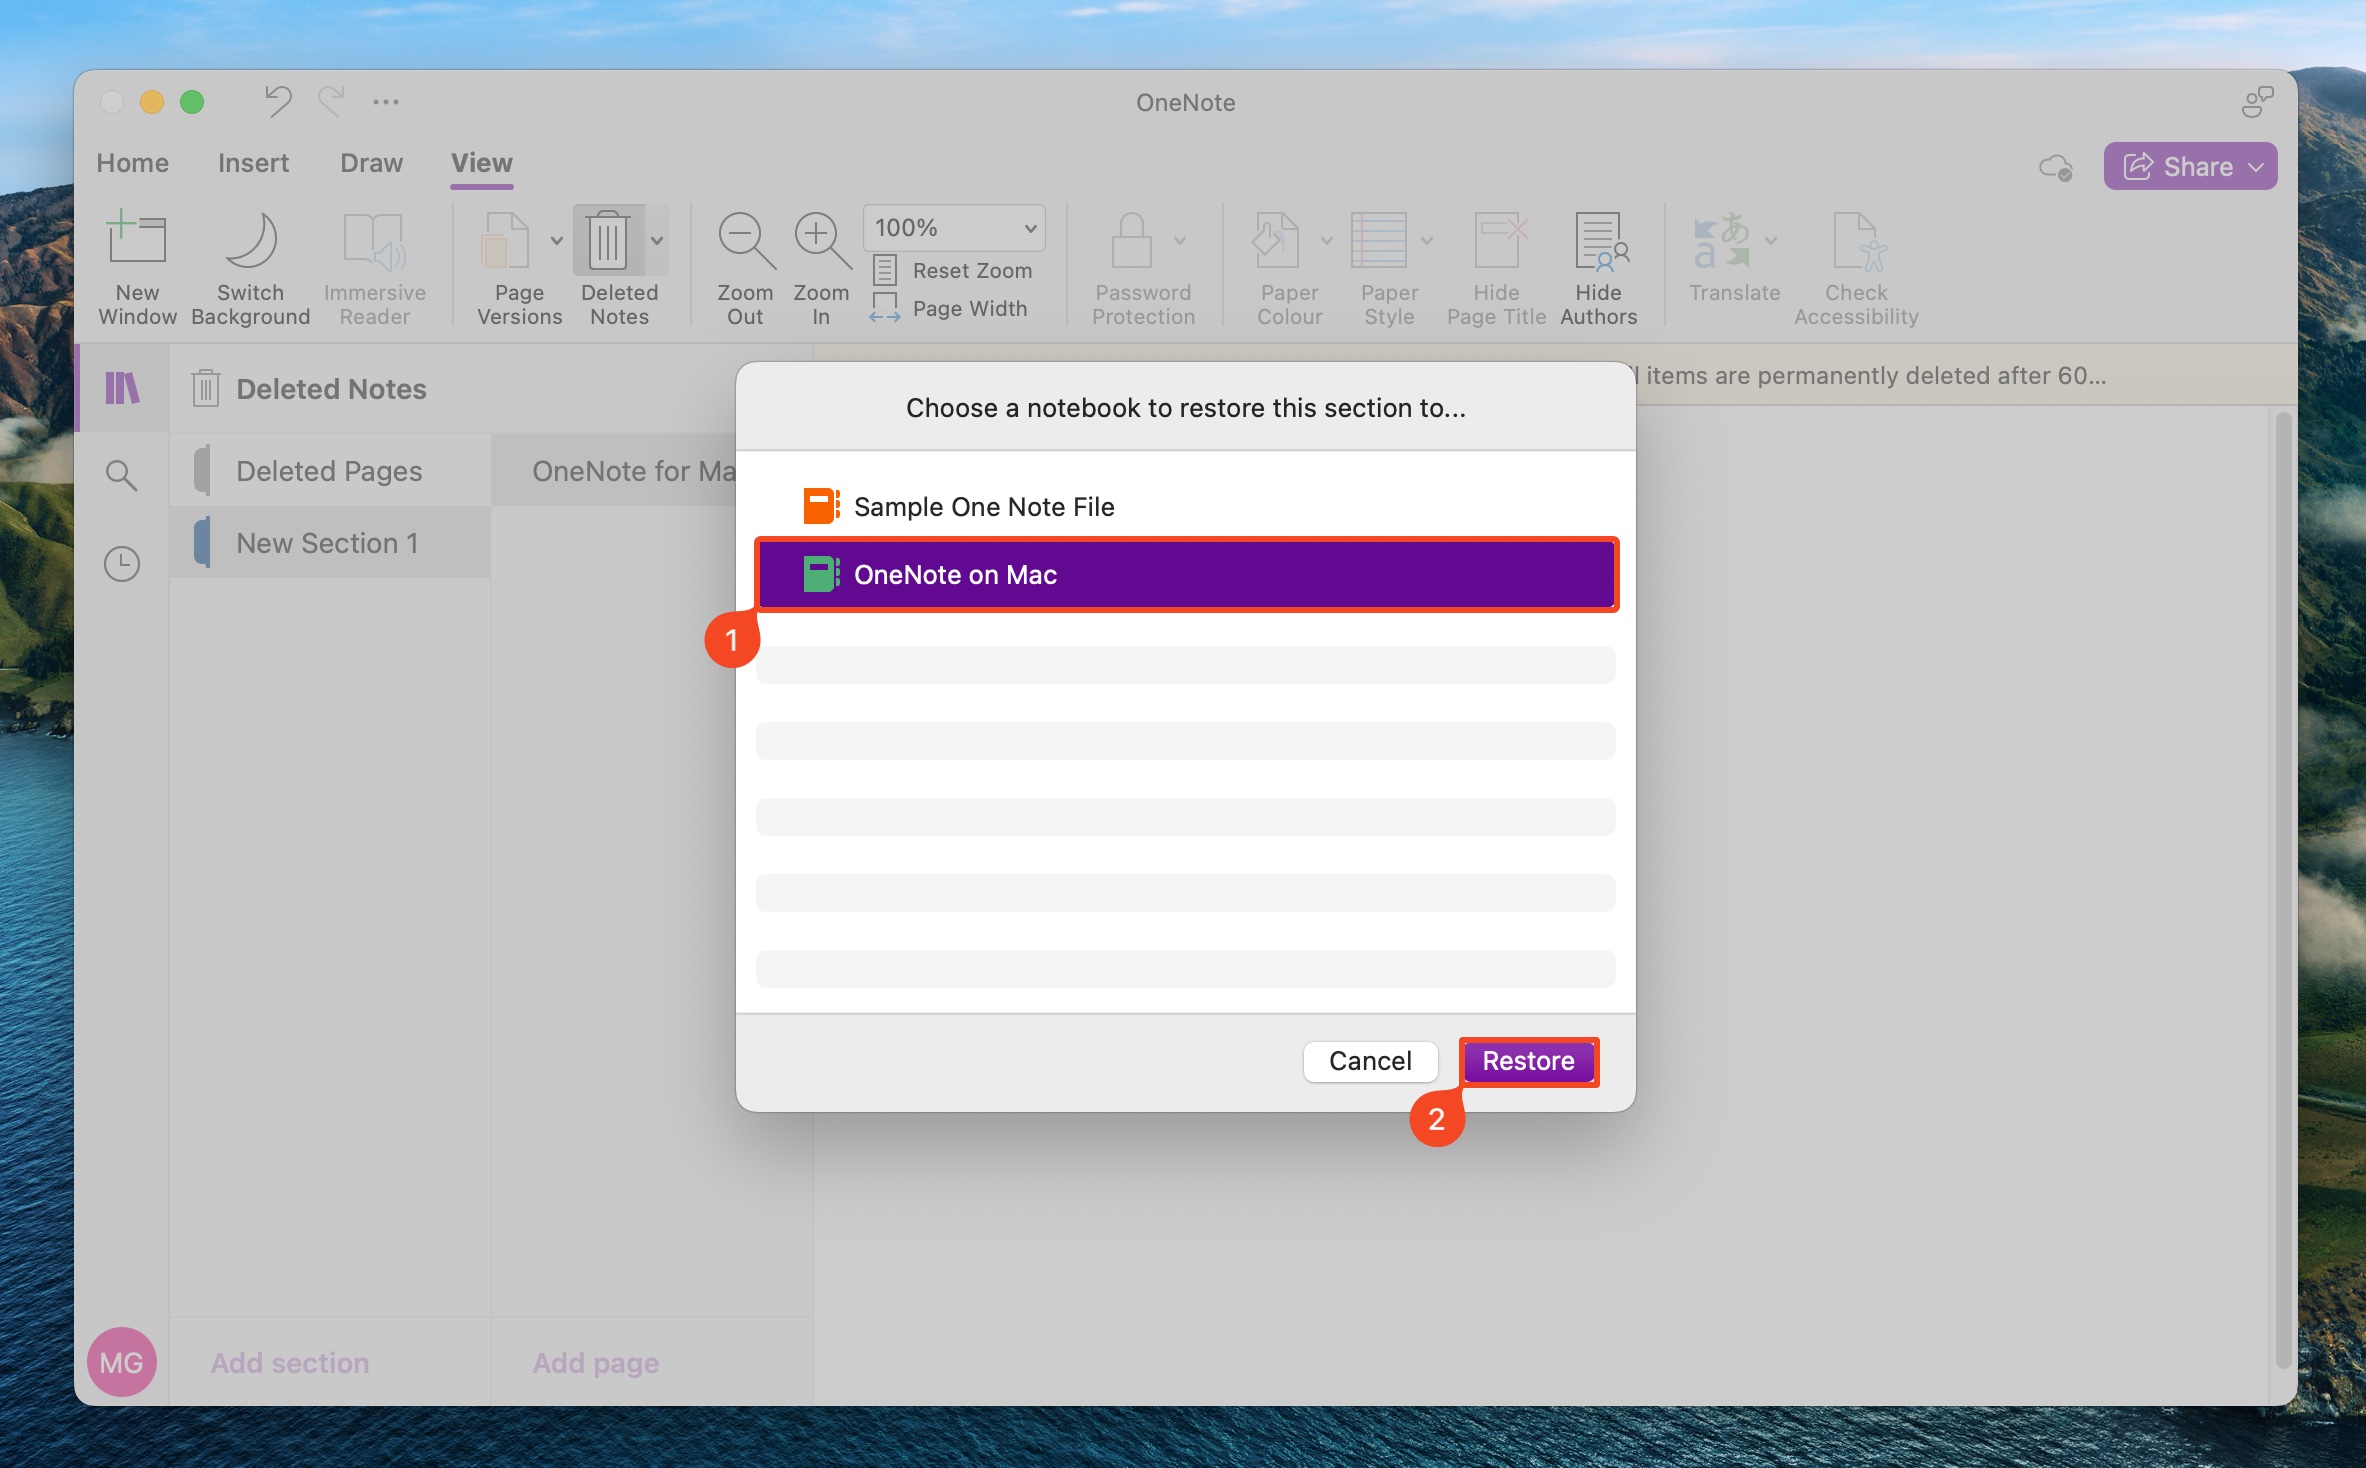  OneNote macOS "Choose a notebook to restore this section to..."